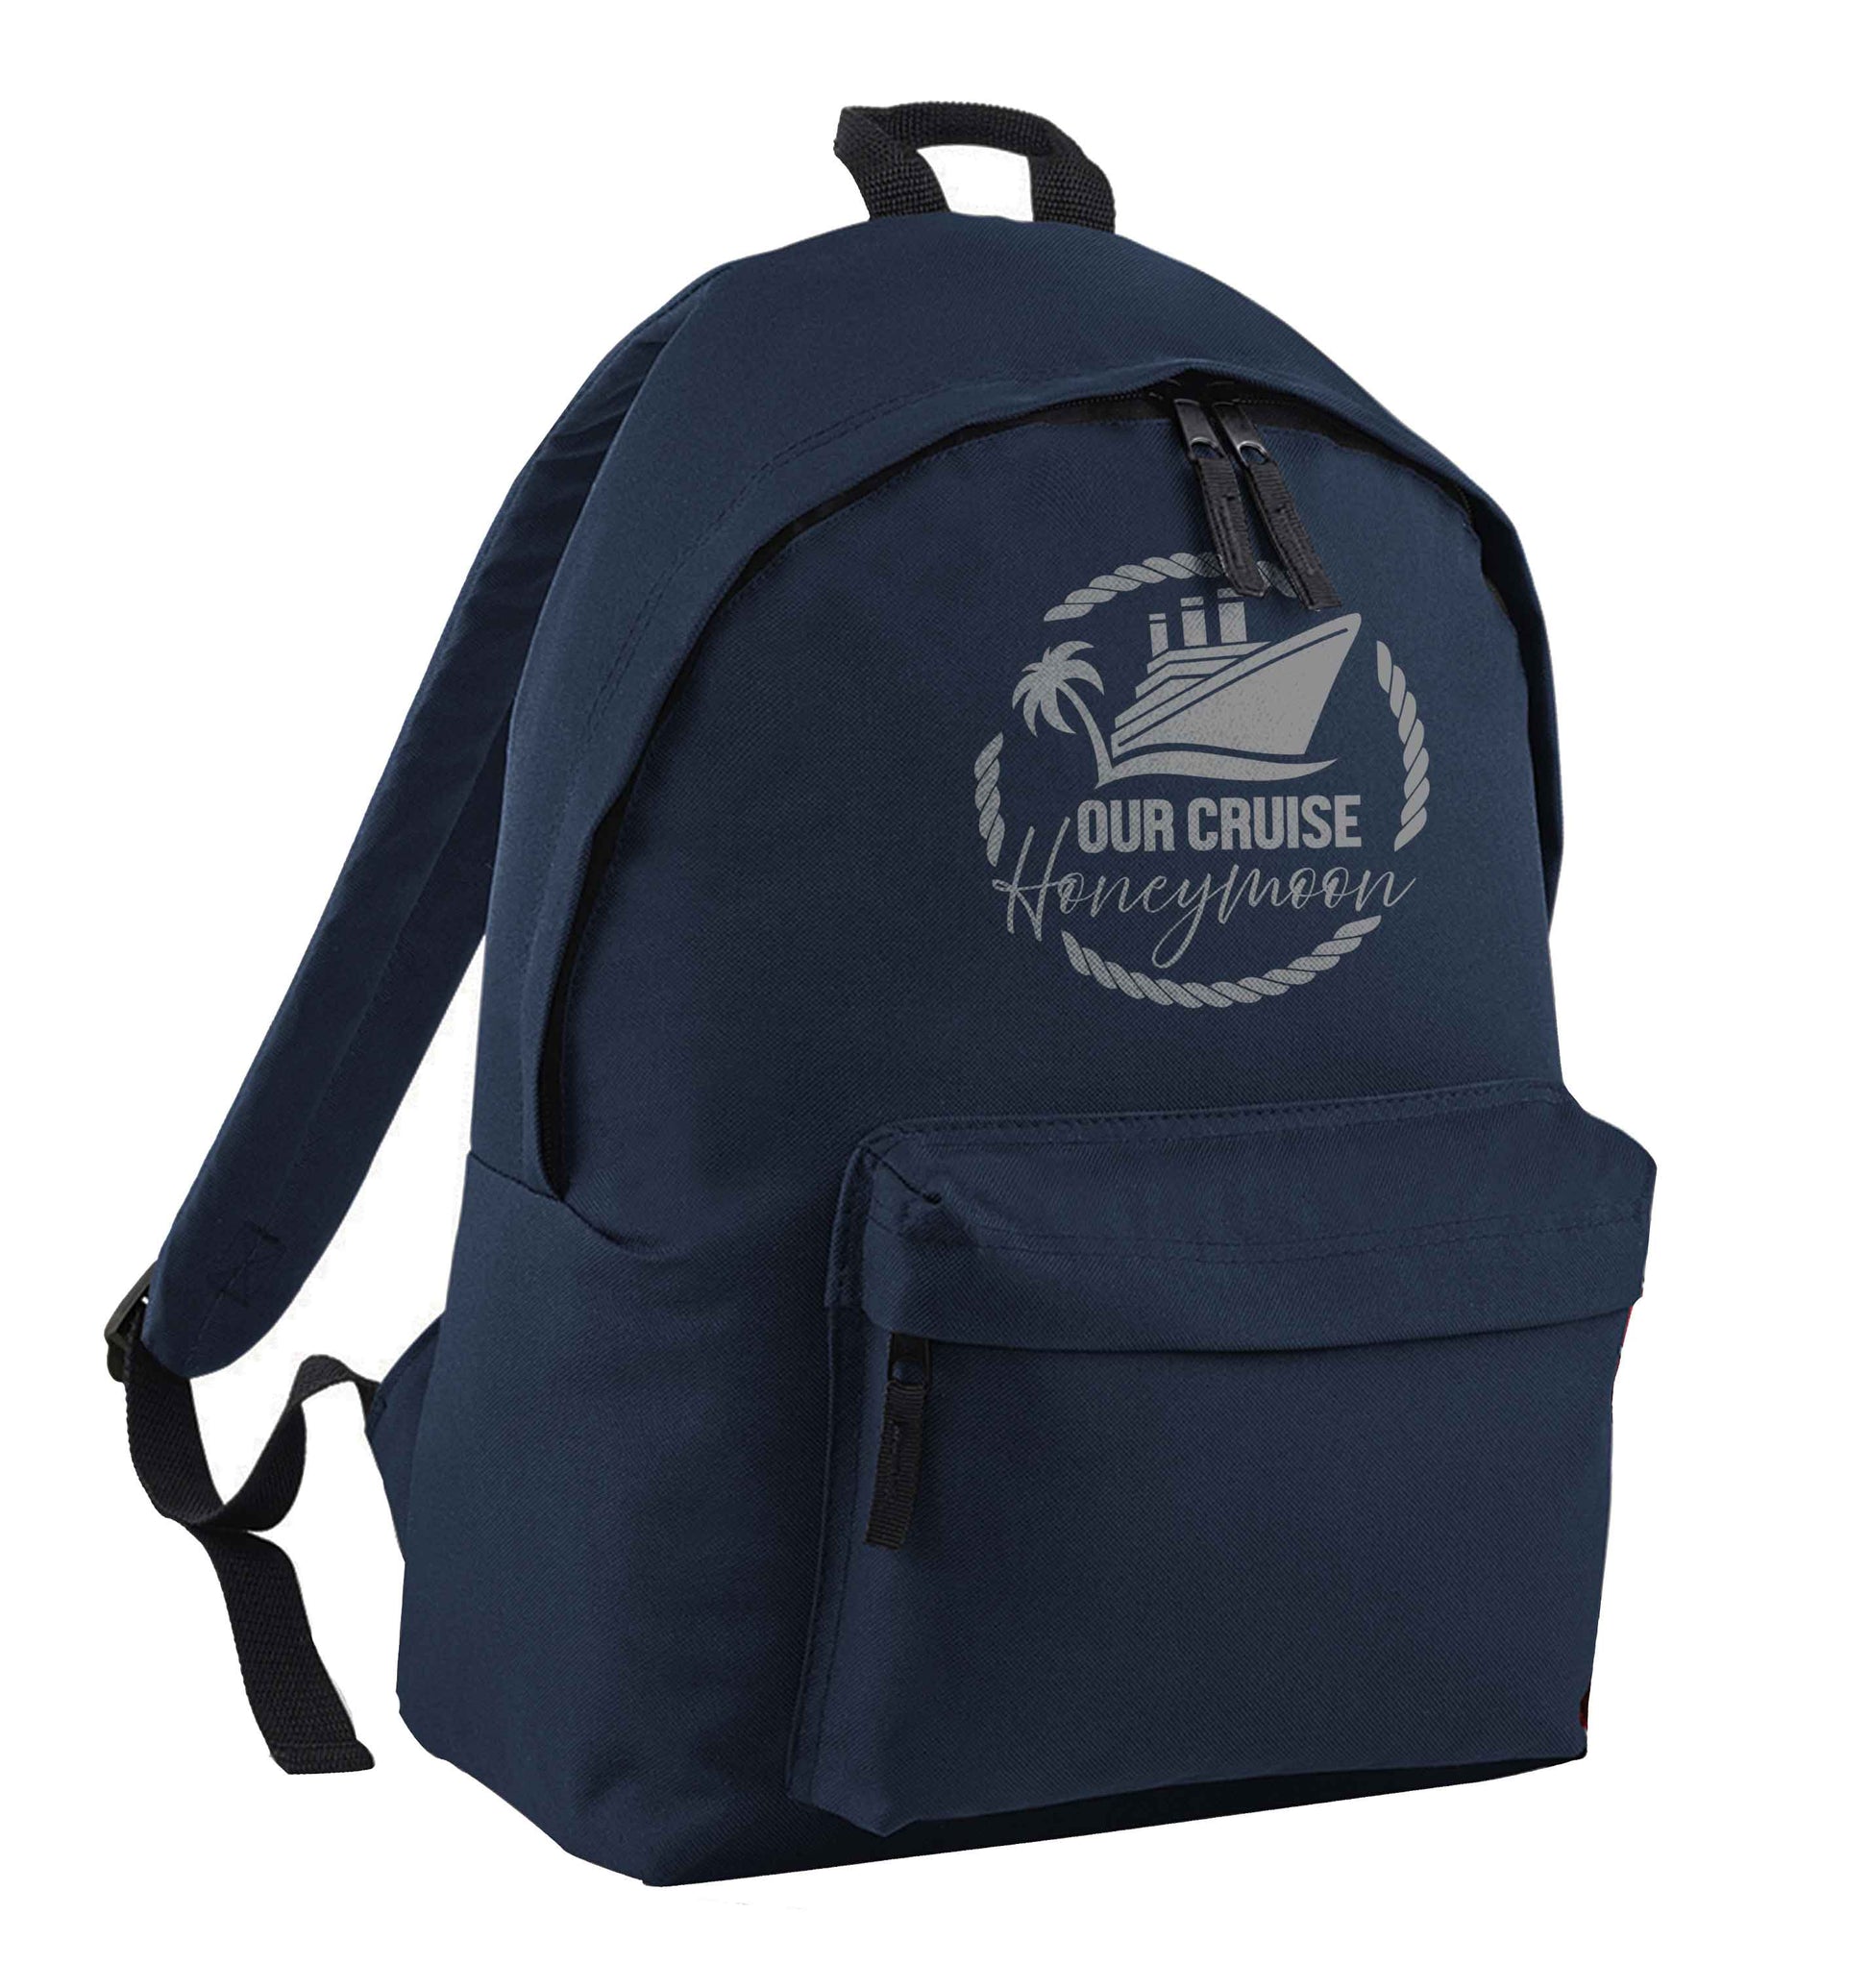 Our cruise honeymoon navy adults backpack